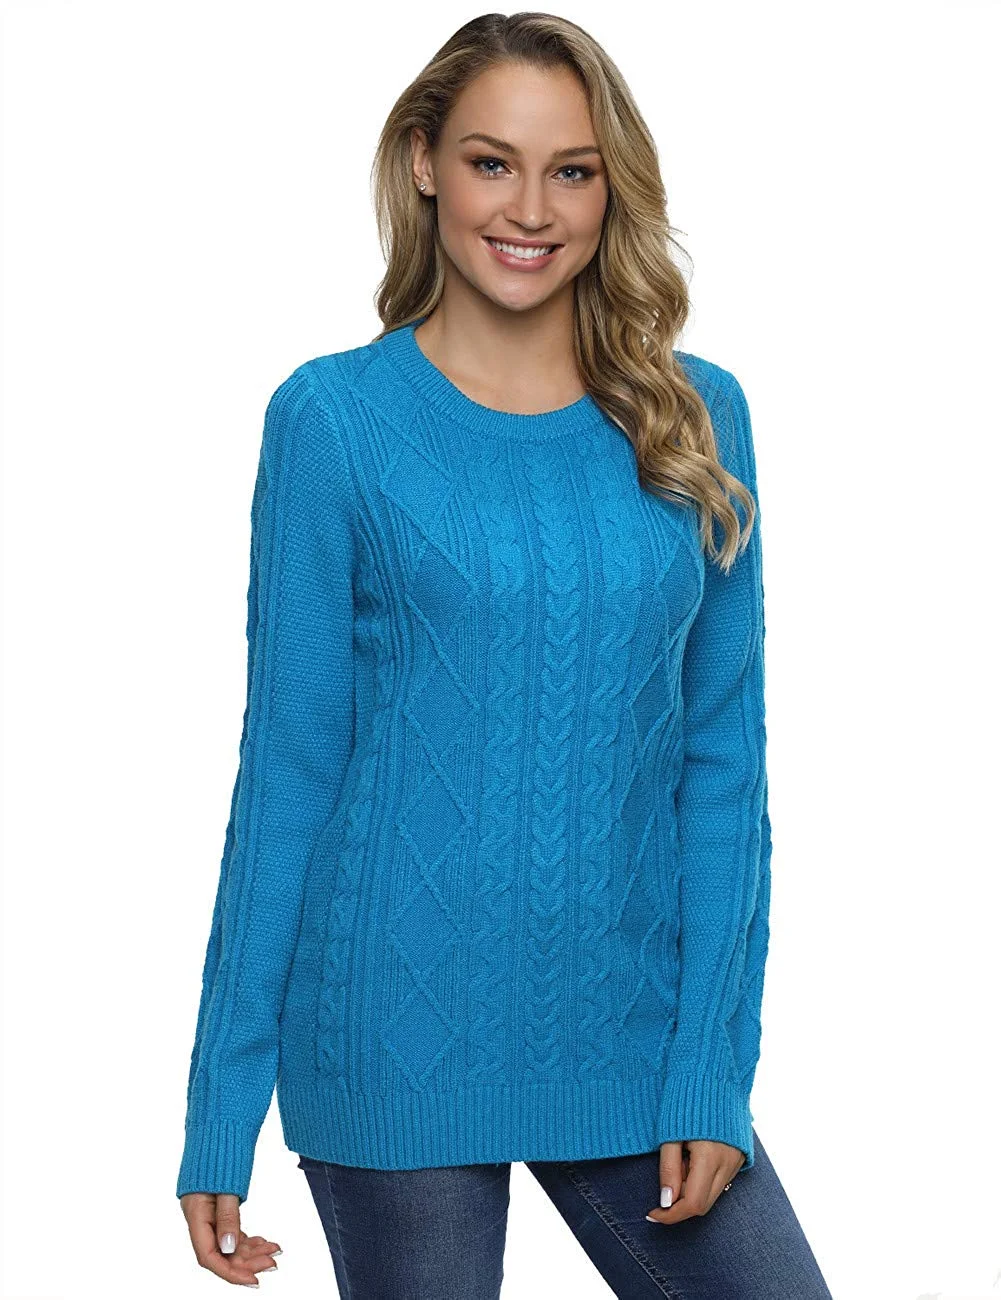 Women's Sweater Crewneck Cable Knit Long Sleeve Pullover Tops